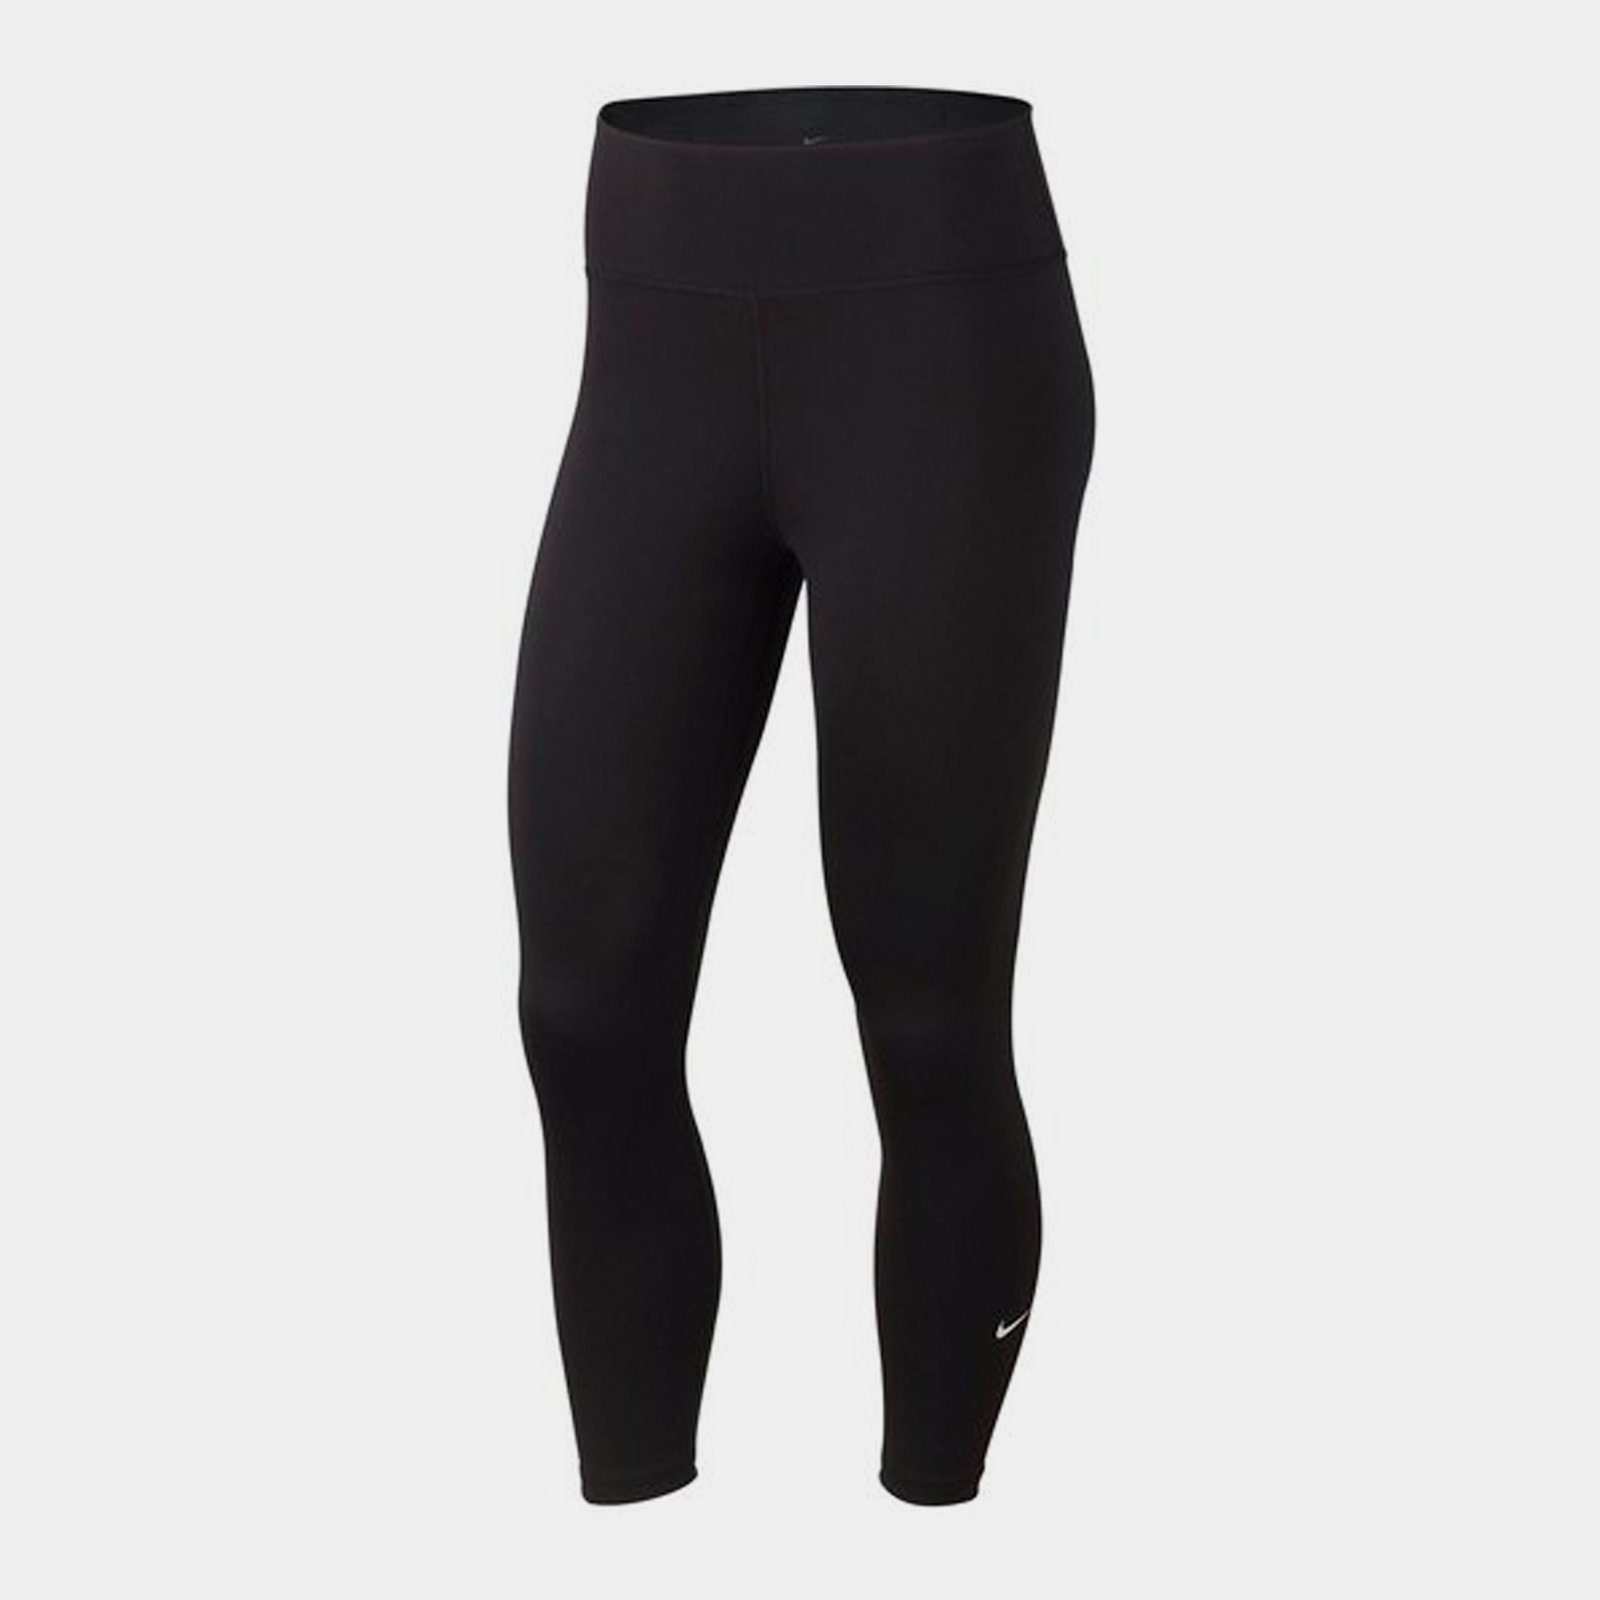 NWT Nike One Mid Rise Tight Fit Leggings Black Size XL (16-18)